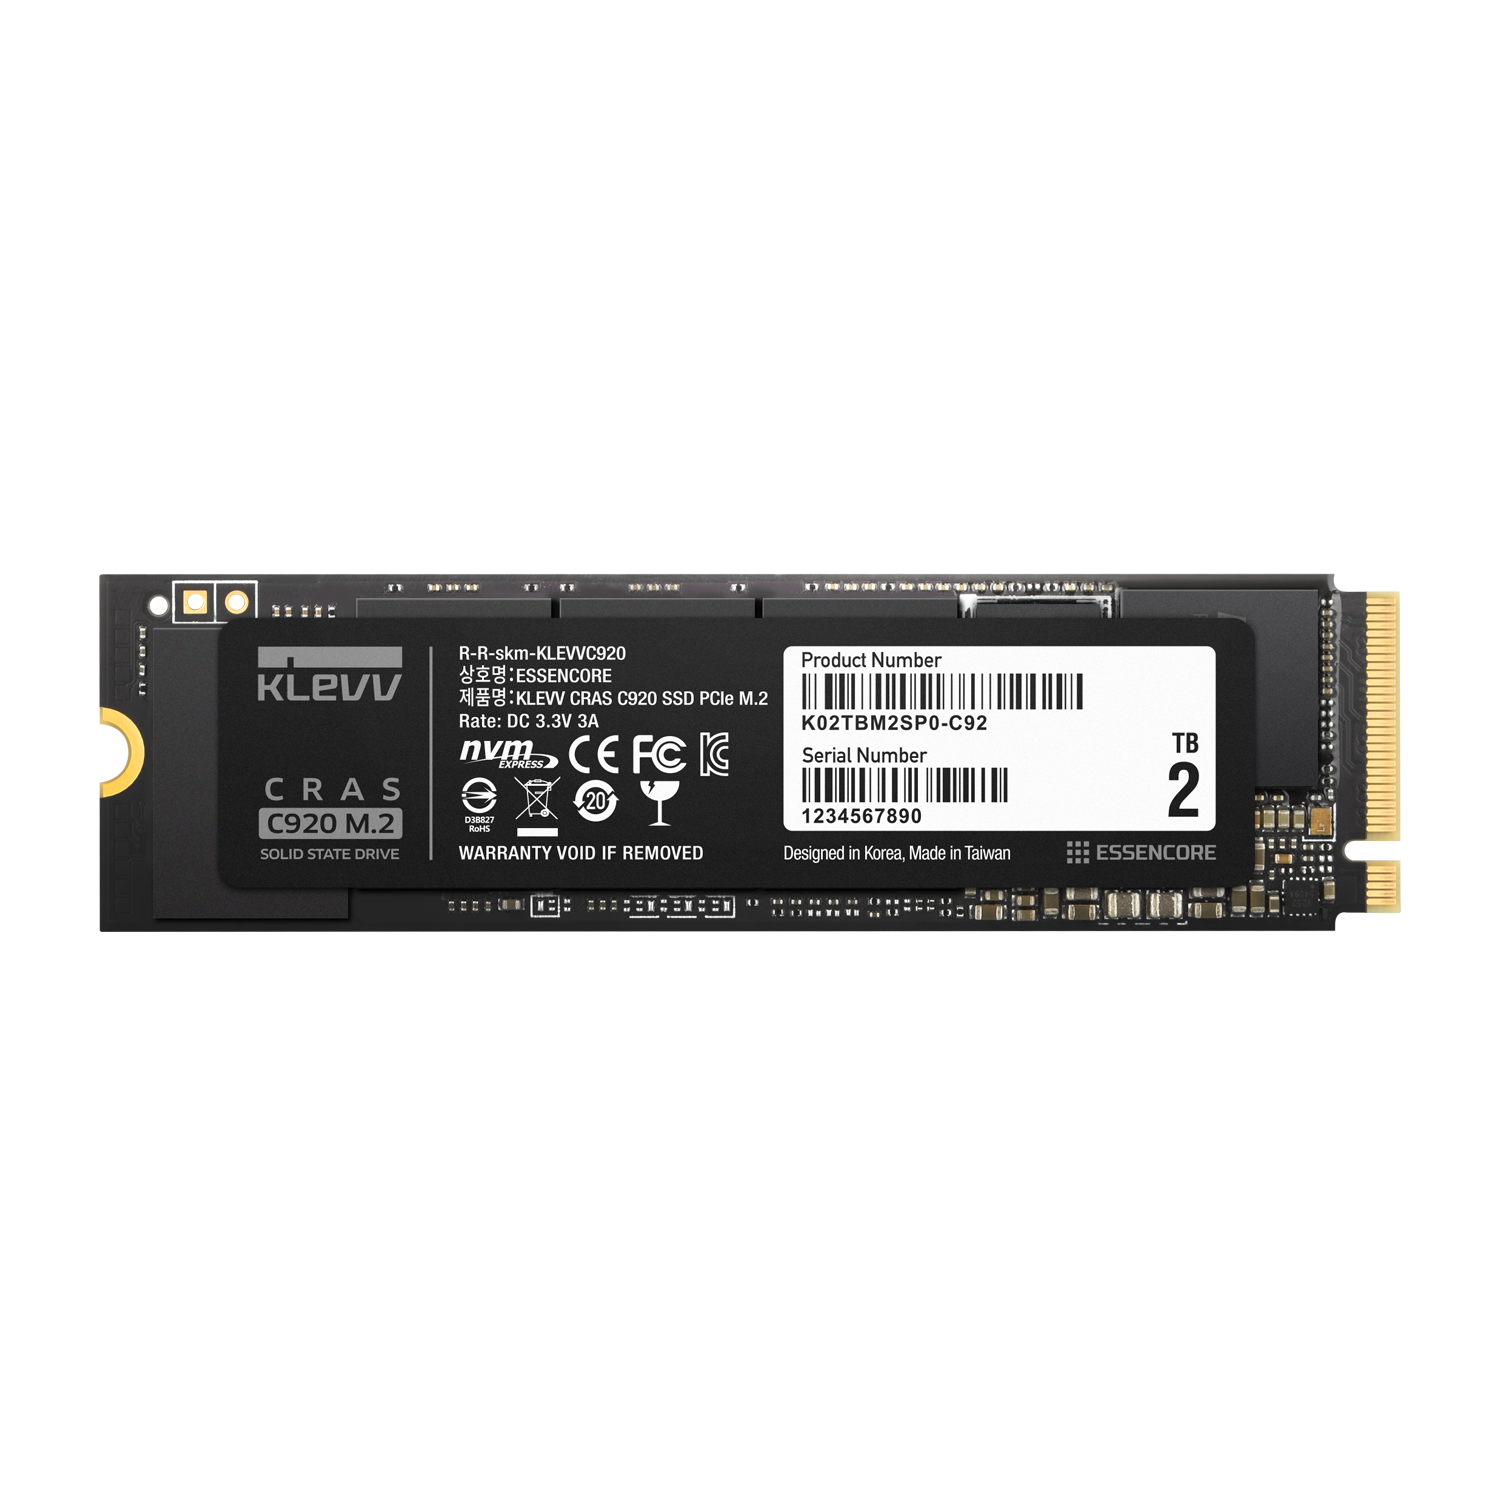 KLEVV Launches the New CRAS C920 and C720 PCIe M.2 Gen4x4/3x4 SSDs